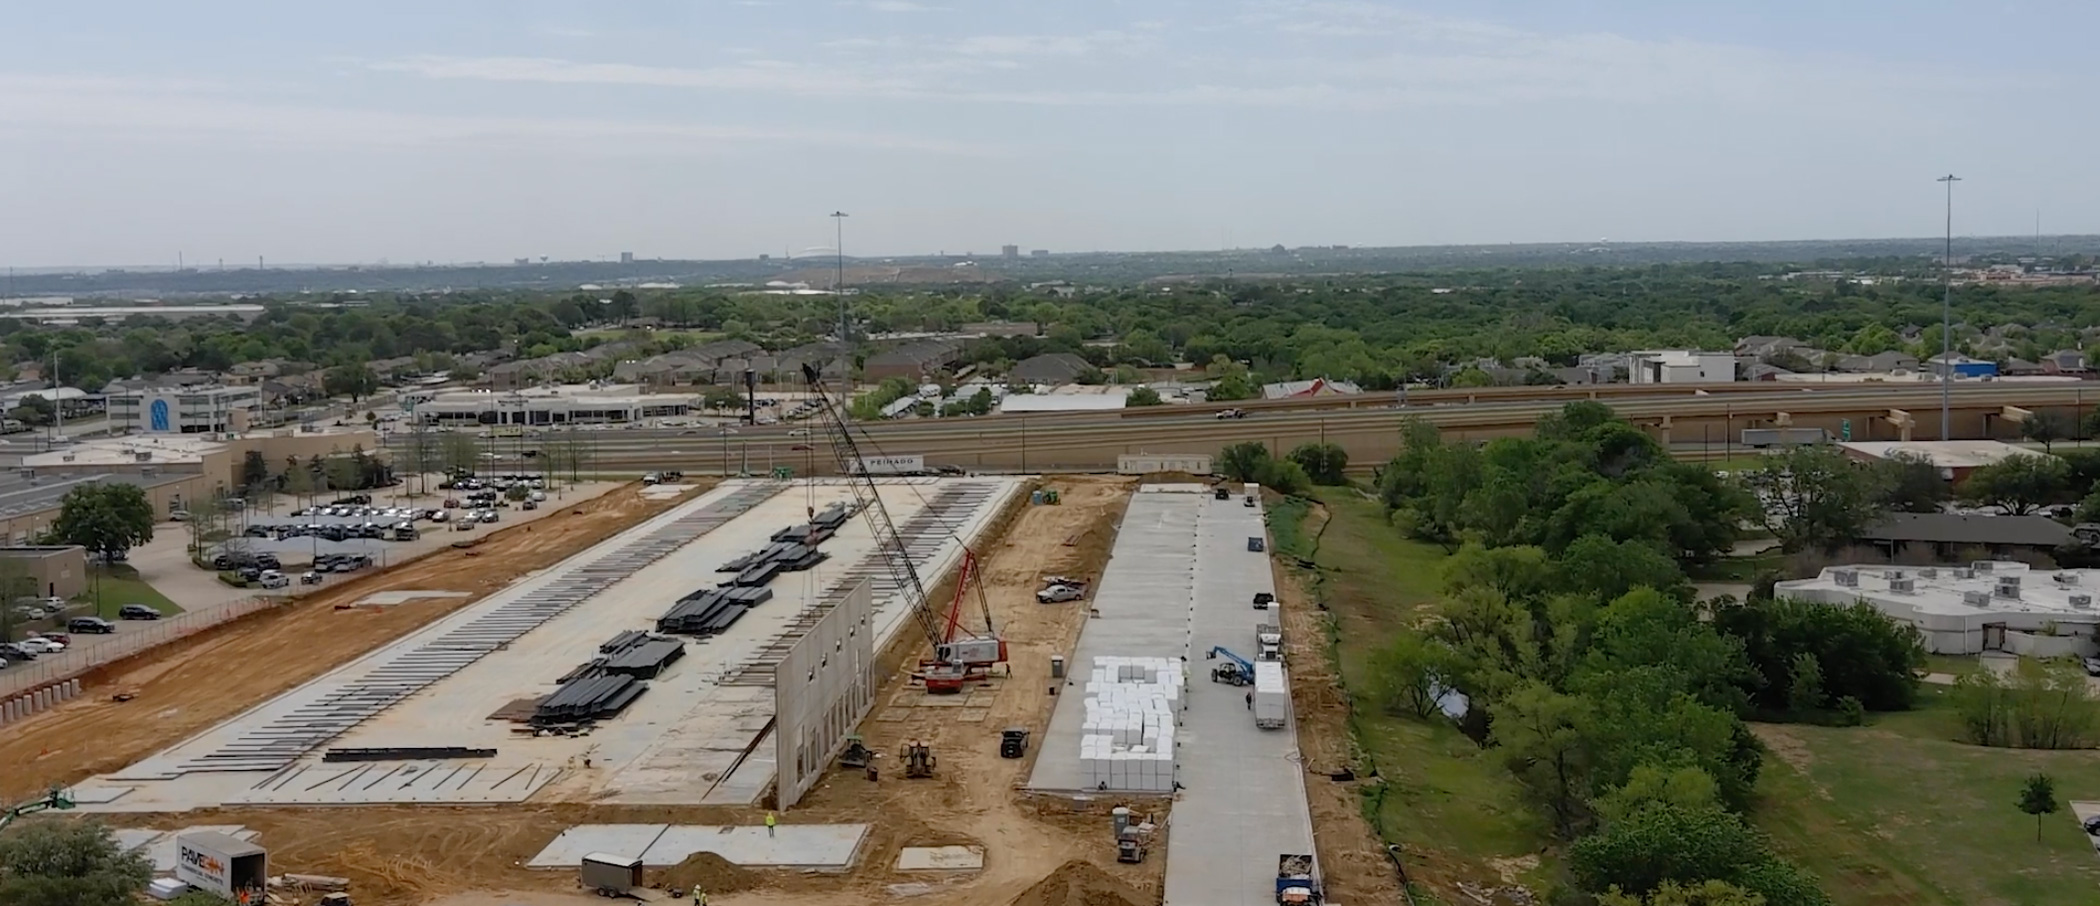 Walls Go Up at CenterPoint Developments in Savannah, Dallas-Fort Worth Image